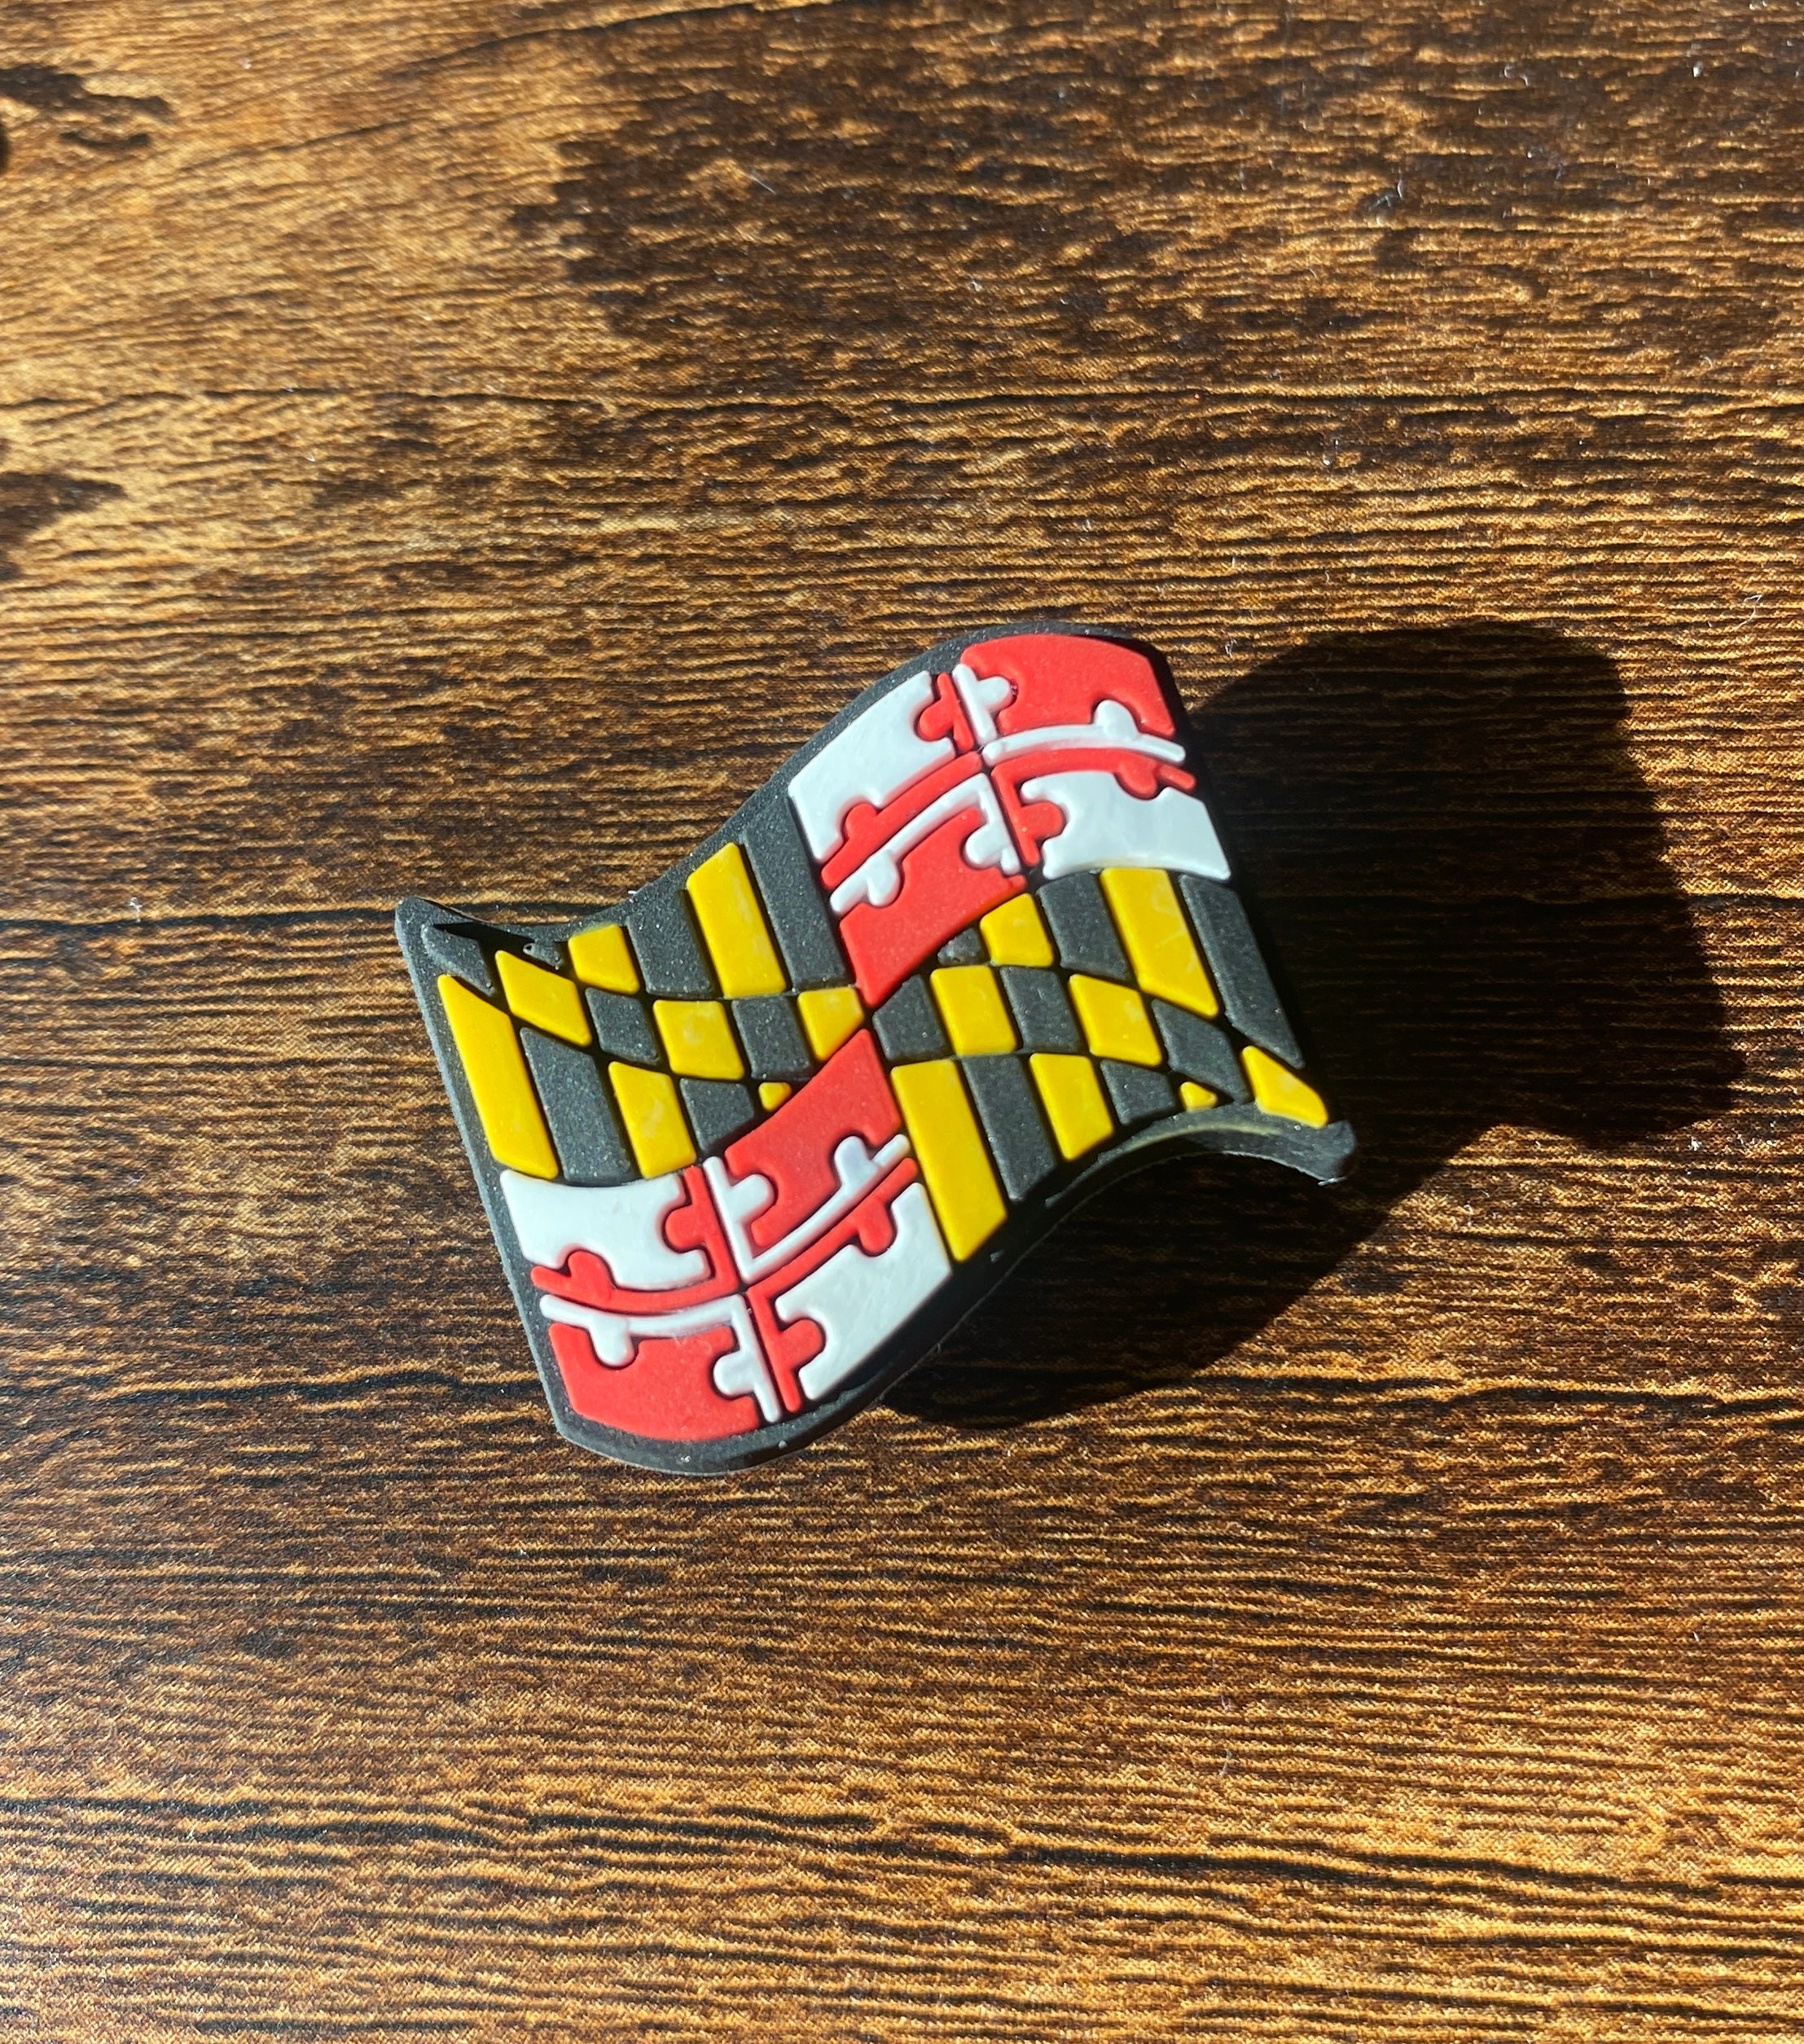 Maryland Icons / Clog Charms - Route One Apparel